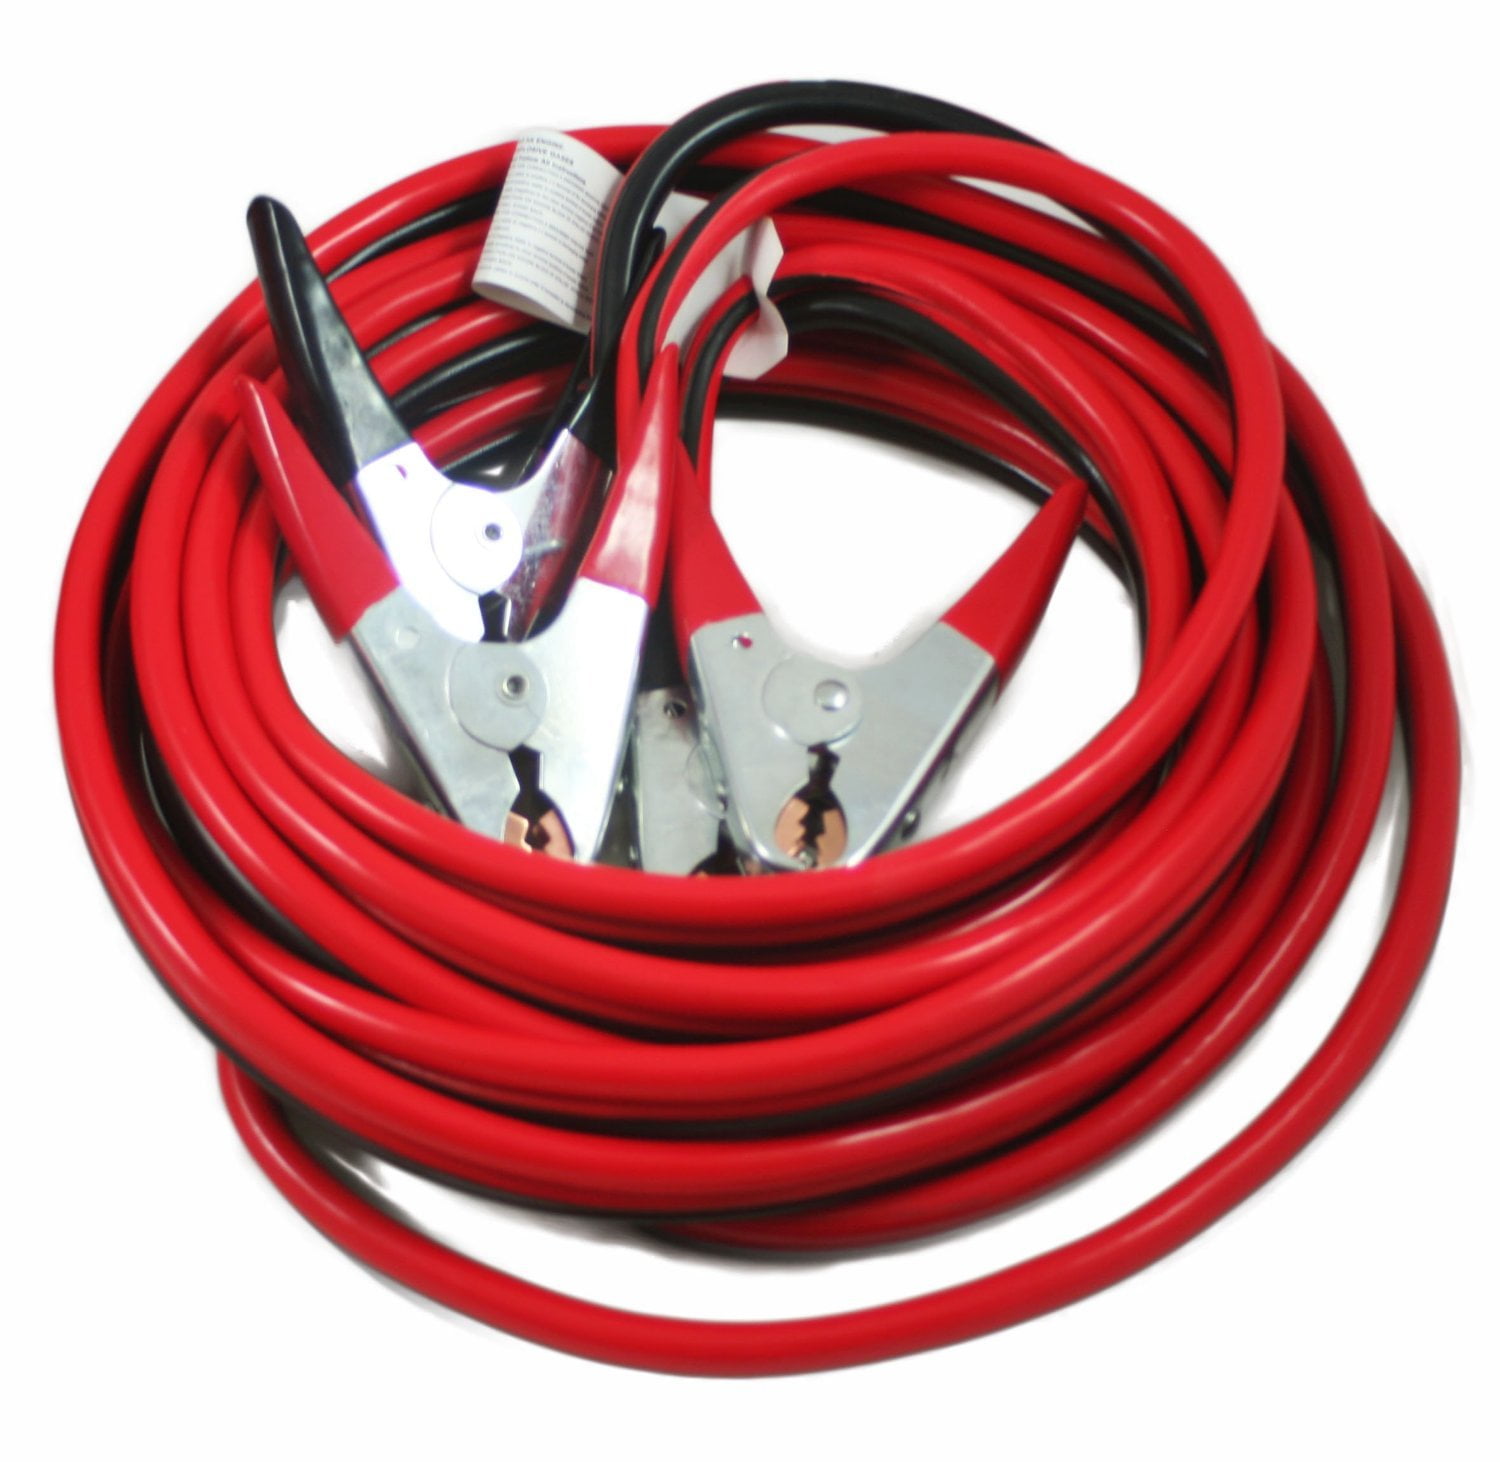 20' 600AMP CAR BATTERY BOOSTER CABLE 2 GAUGE EMERGENCY POWER JUMPER HEAVY DUTY 